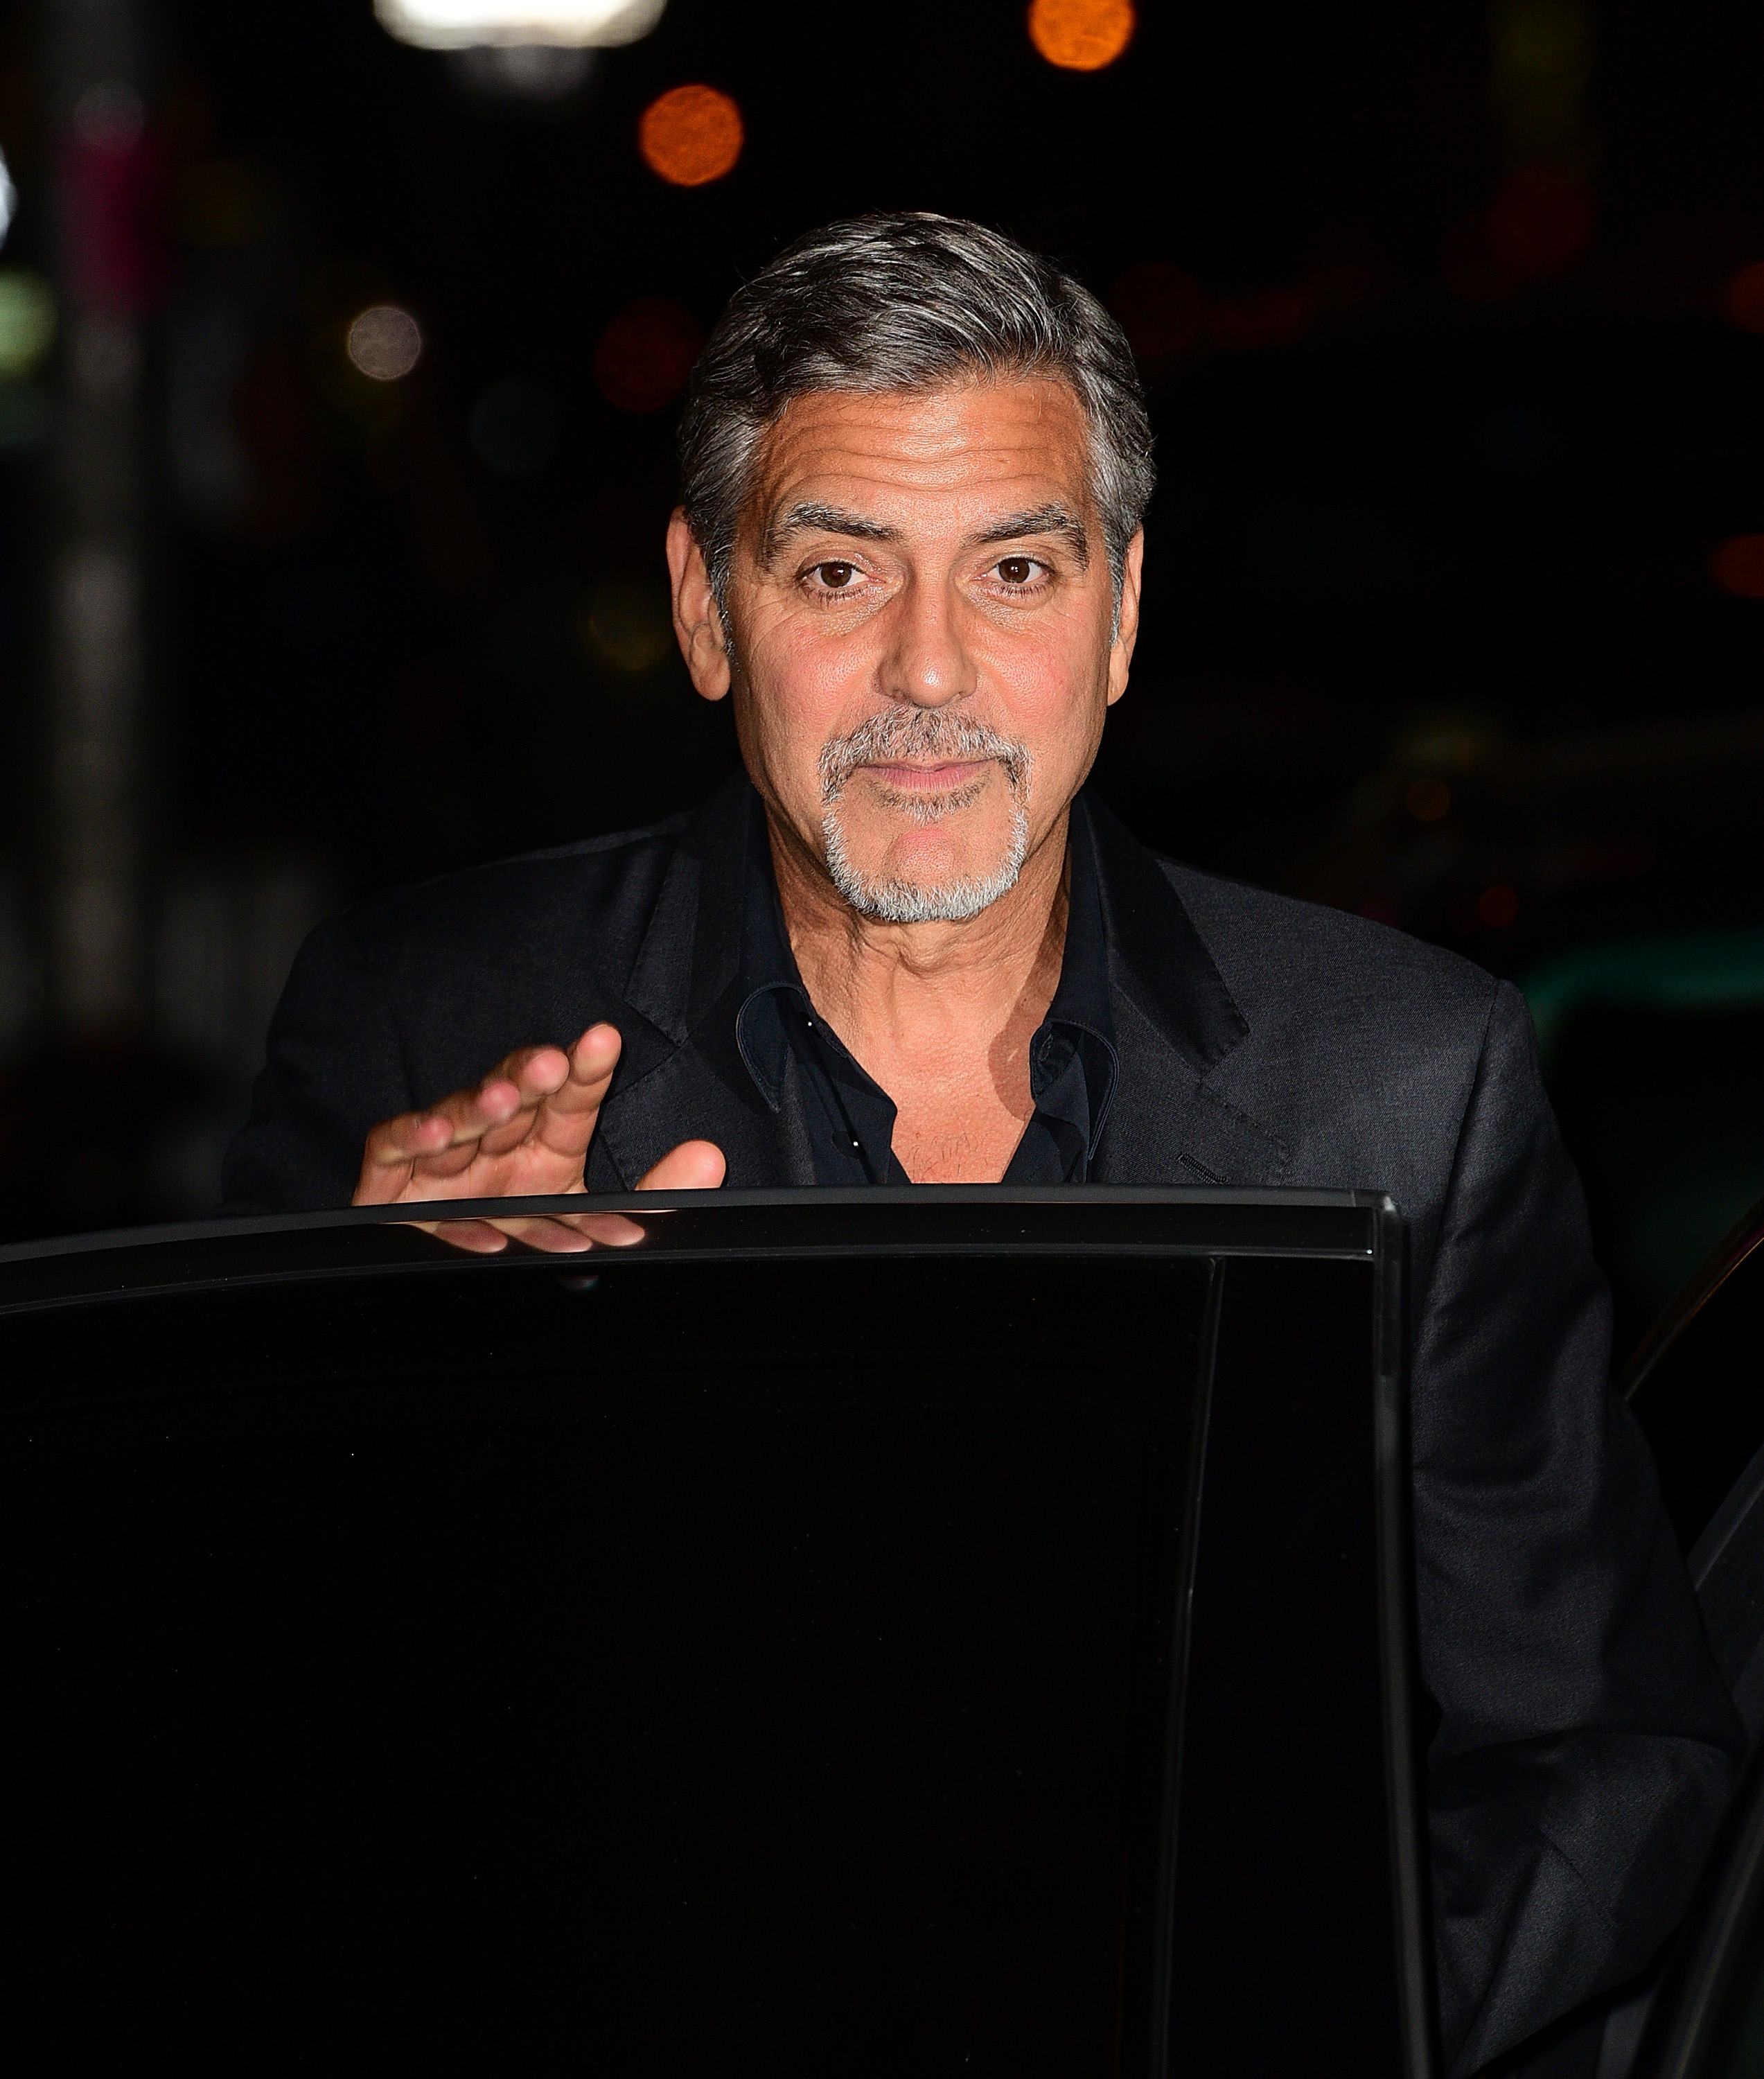 George Clooney leaves the first taping of "The Late Show With Stephen Colbert" at Ed Sullivan Theater on September 8, 2015 in New York City. (James Devaney—WireImage/Getty Images)